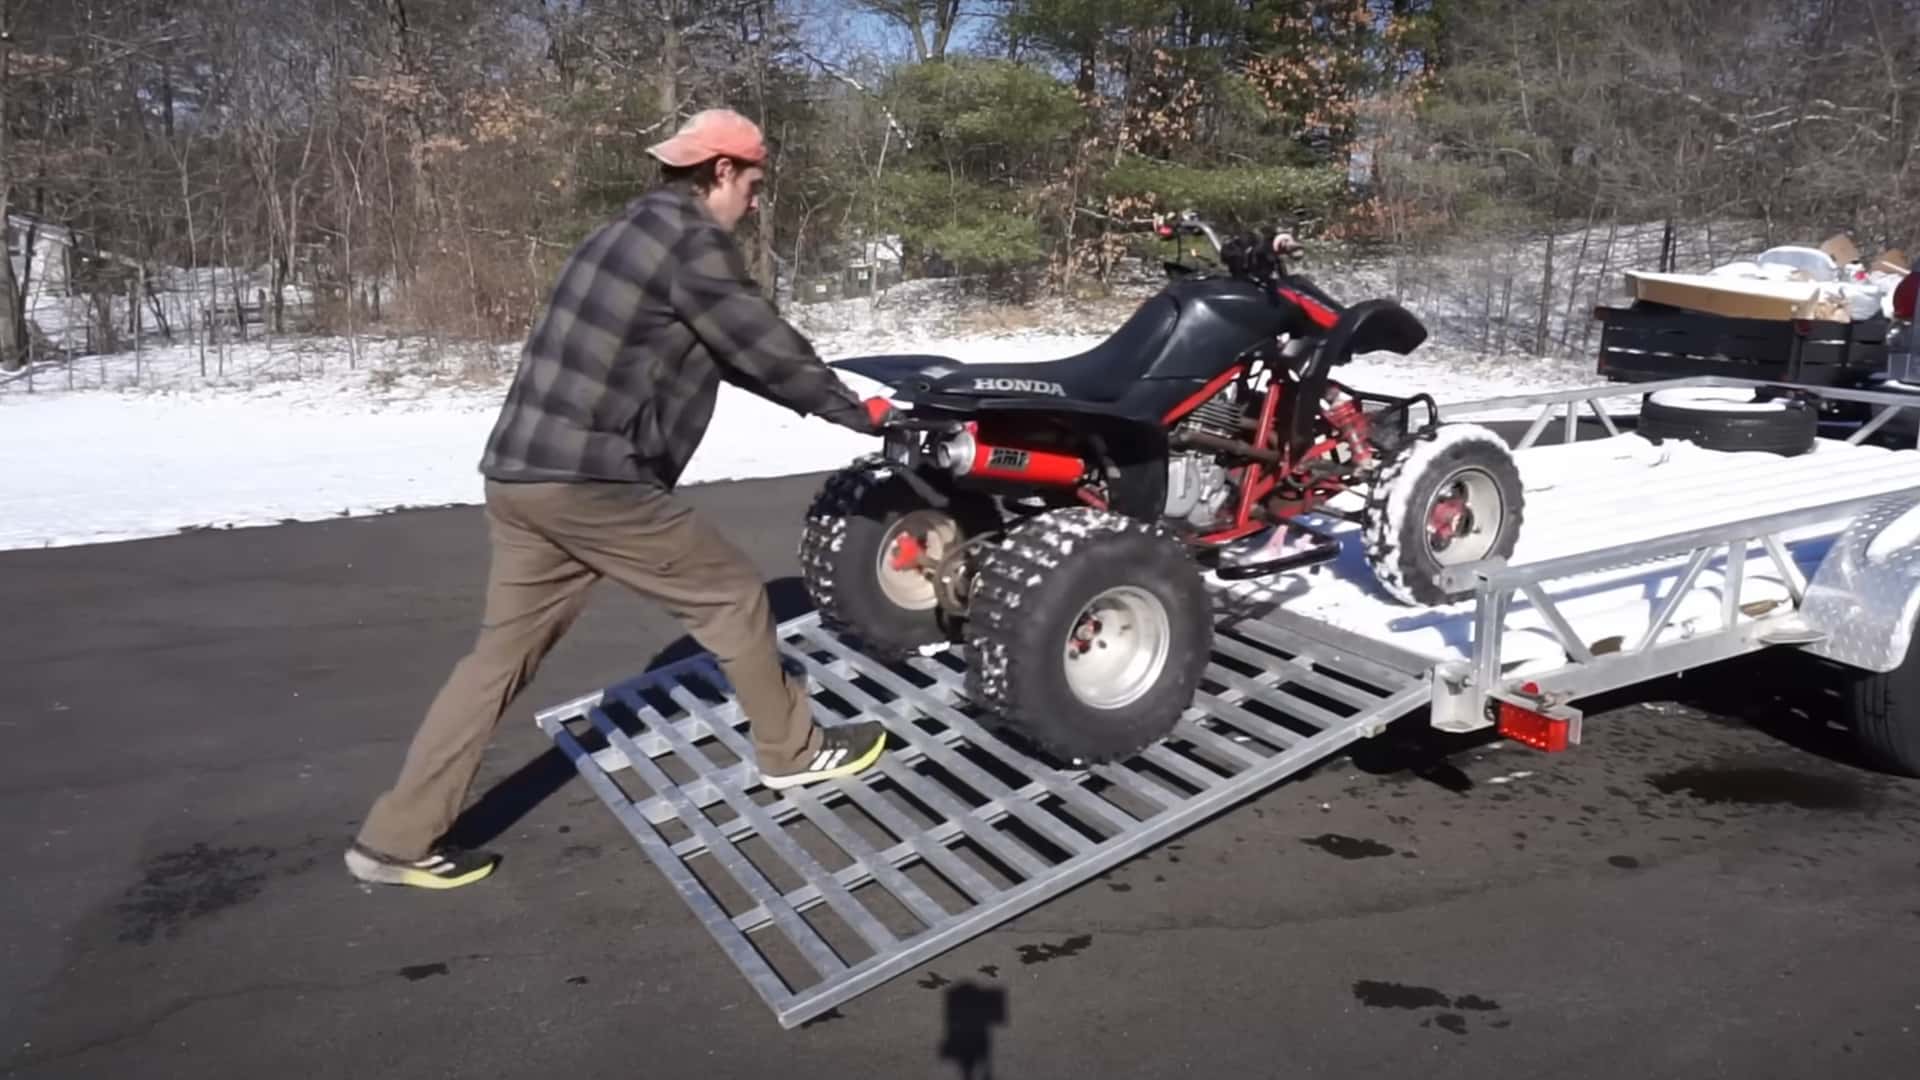 amazon, watch this 1998 honda 300ex quad come back to life after sitting for years